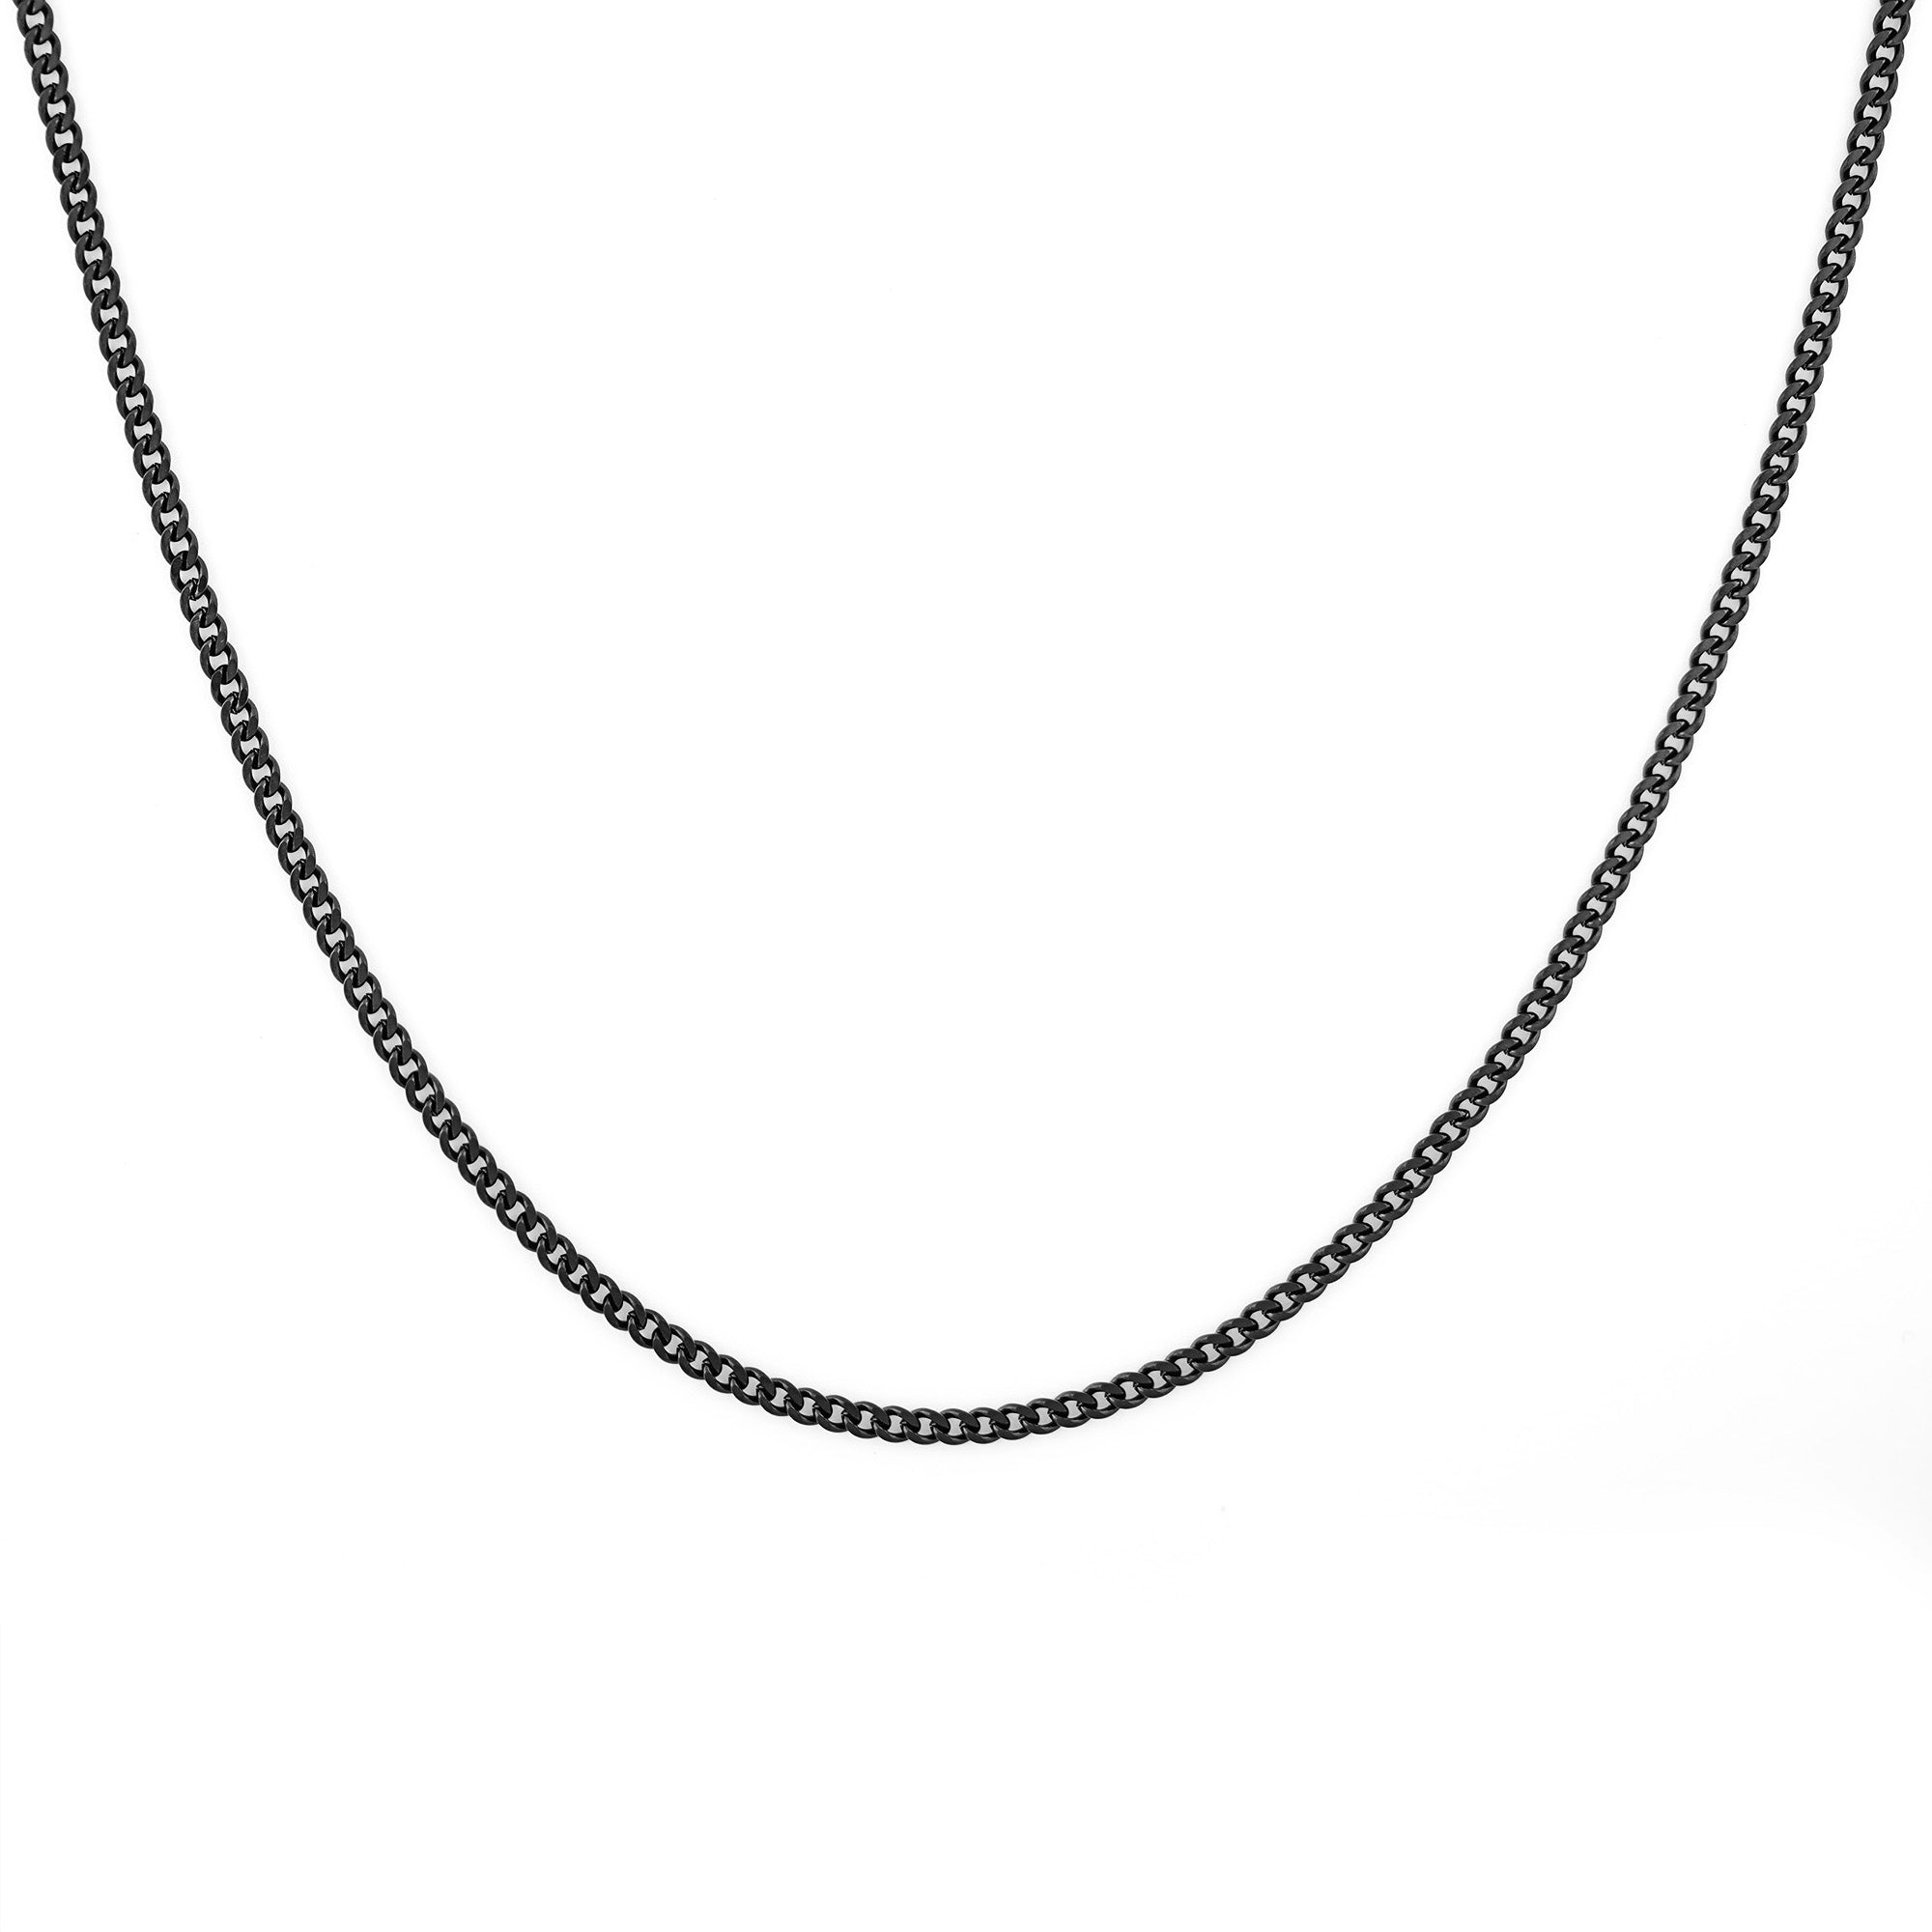 St-Laurent men's necklace by Five Jwlry, featuring a thin 3mm flat Cuban chain in black stainless steel. Hypoallergenic, waterproof, and backed by a 2-year warranty.